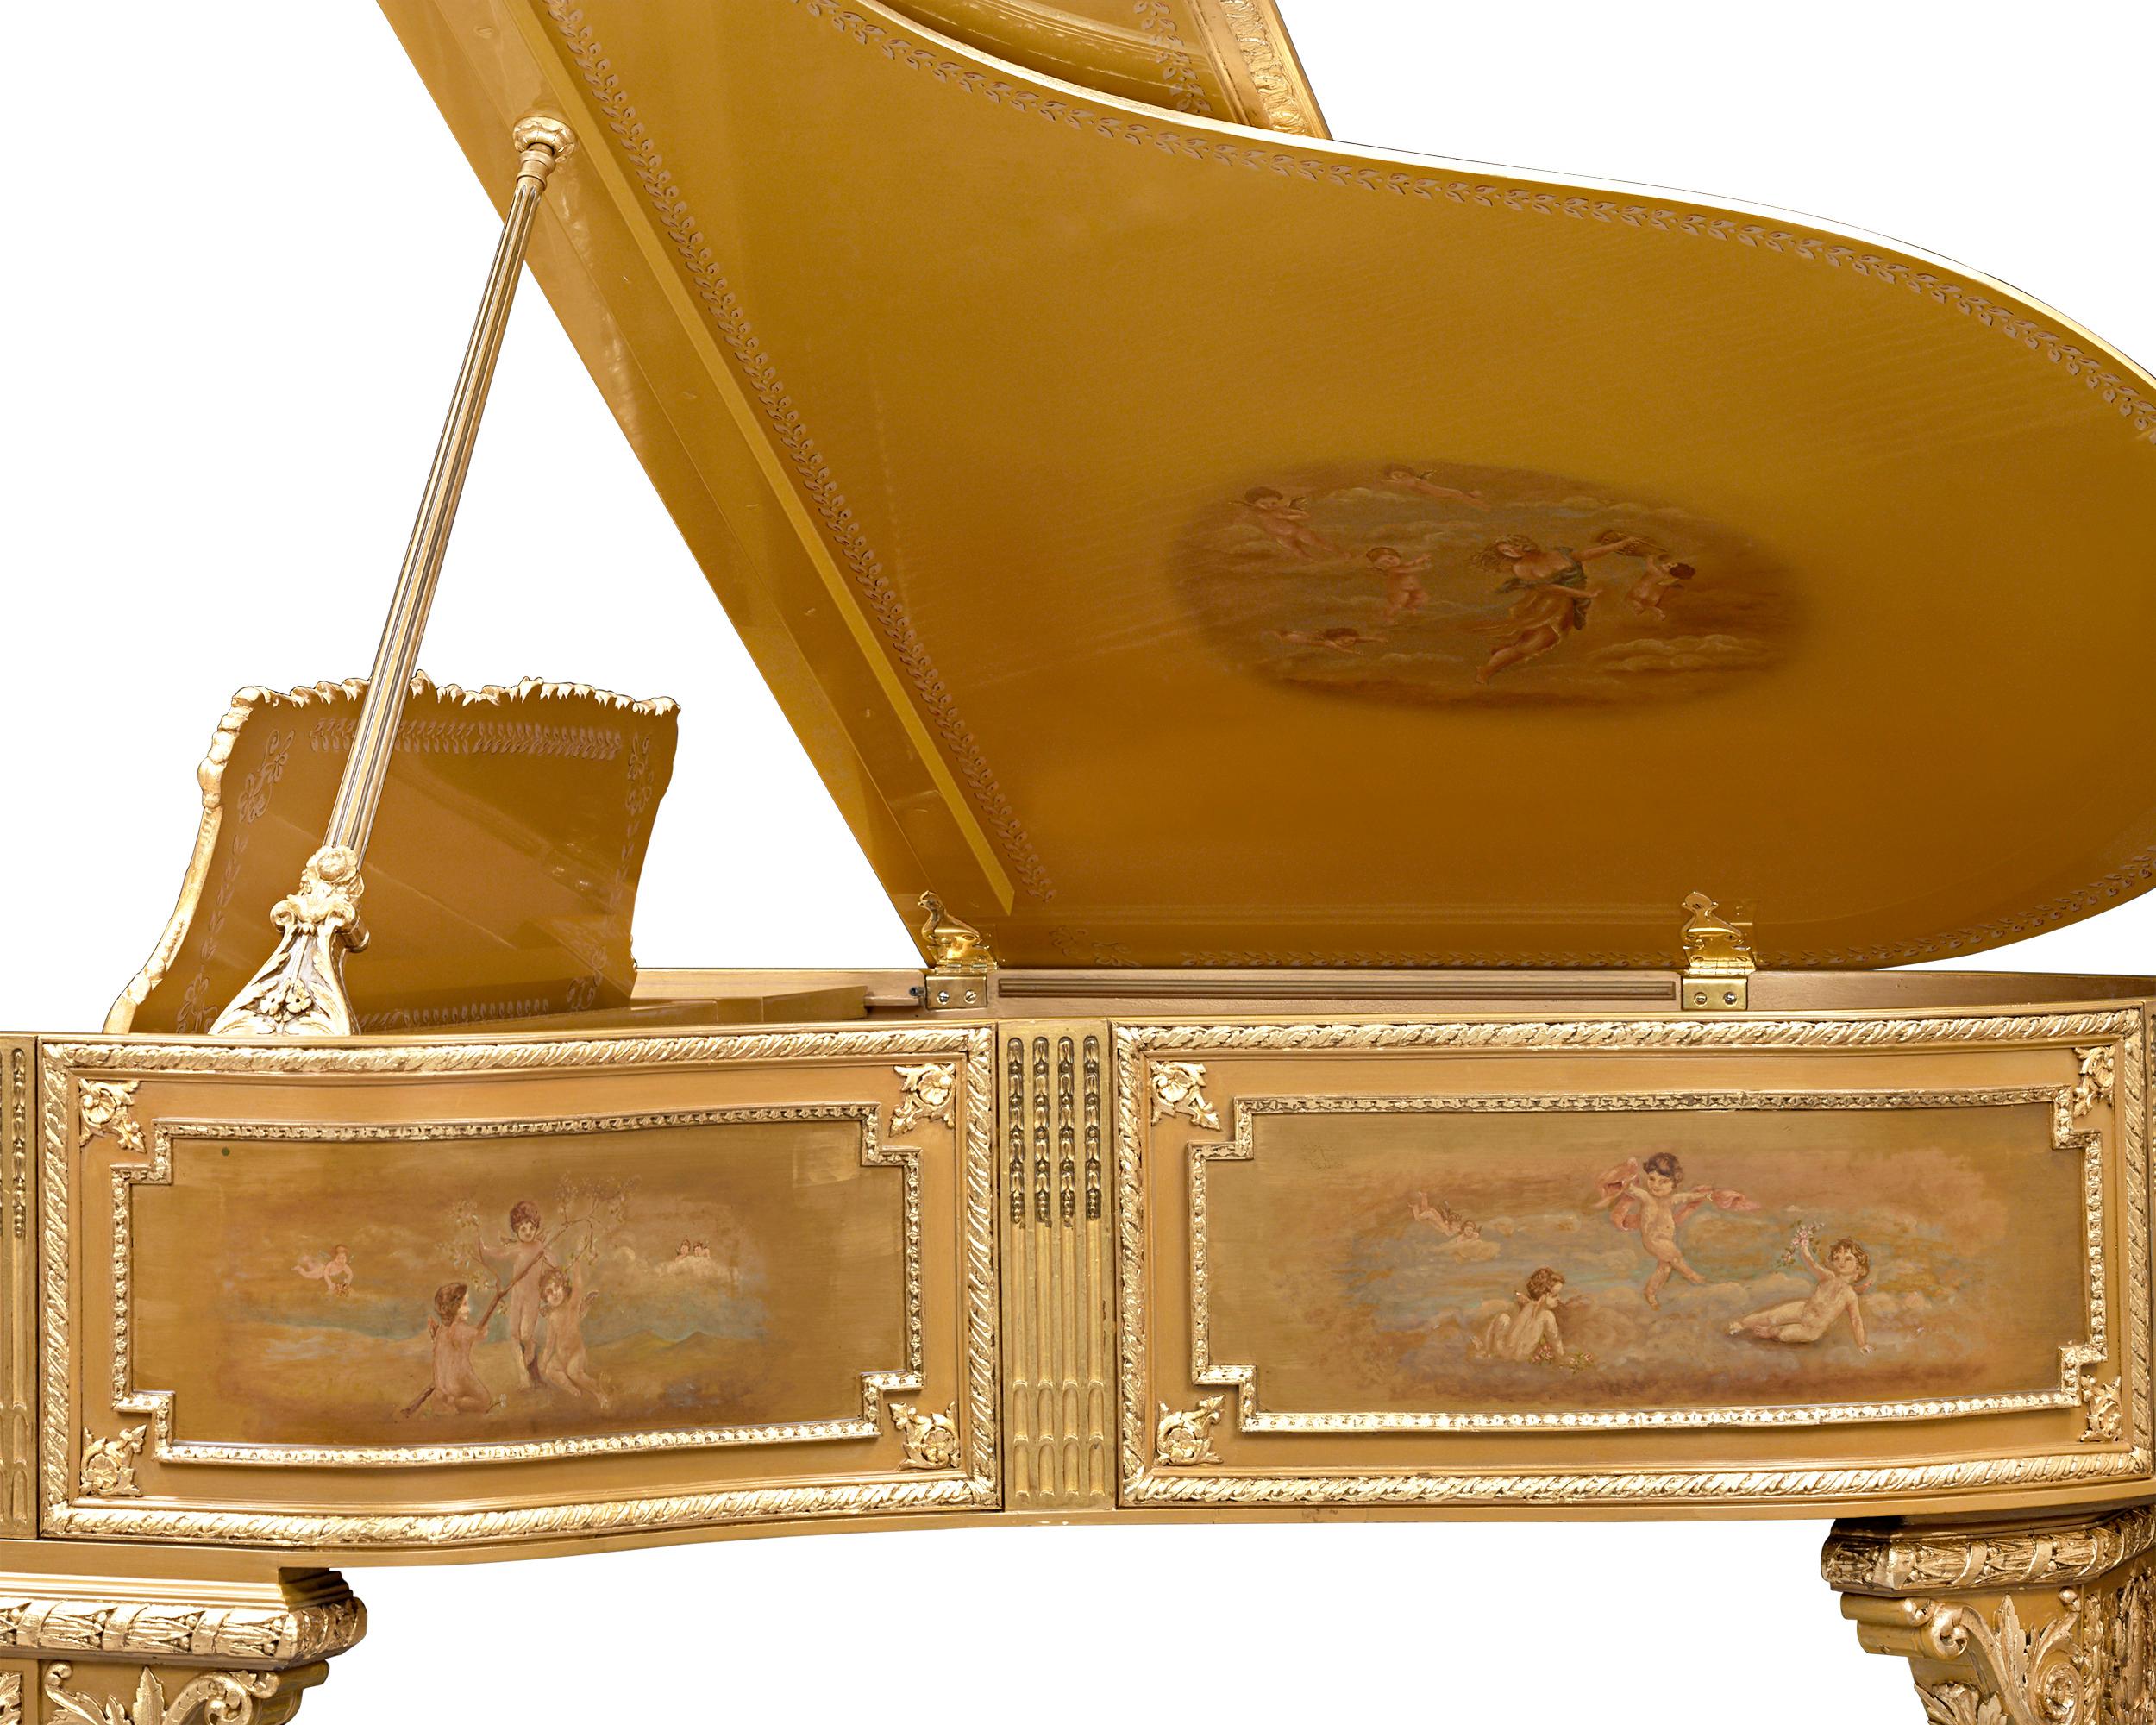 Gilt Grand Reproducing Piano by Steinway & Sons